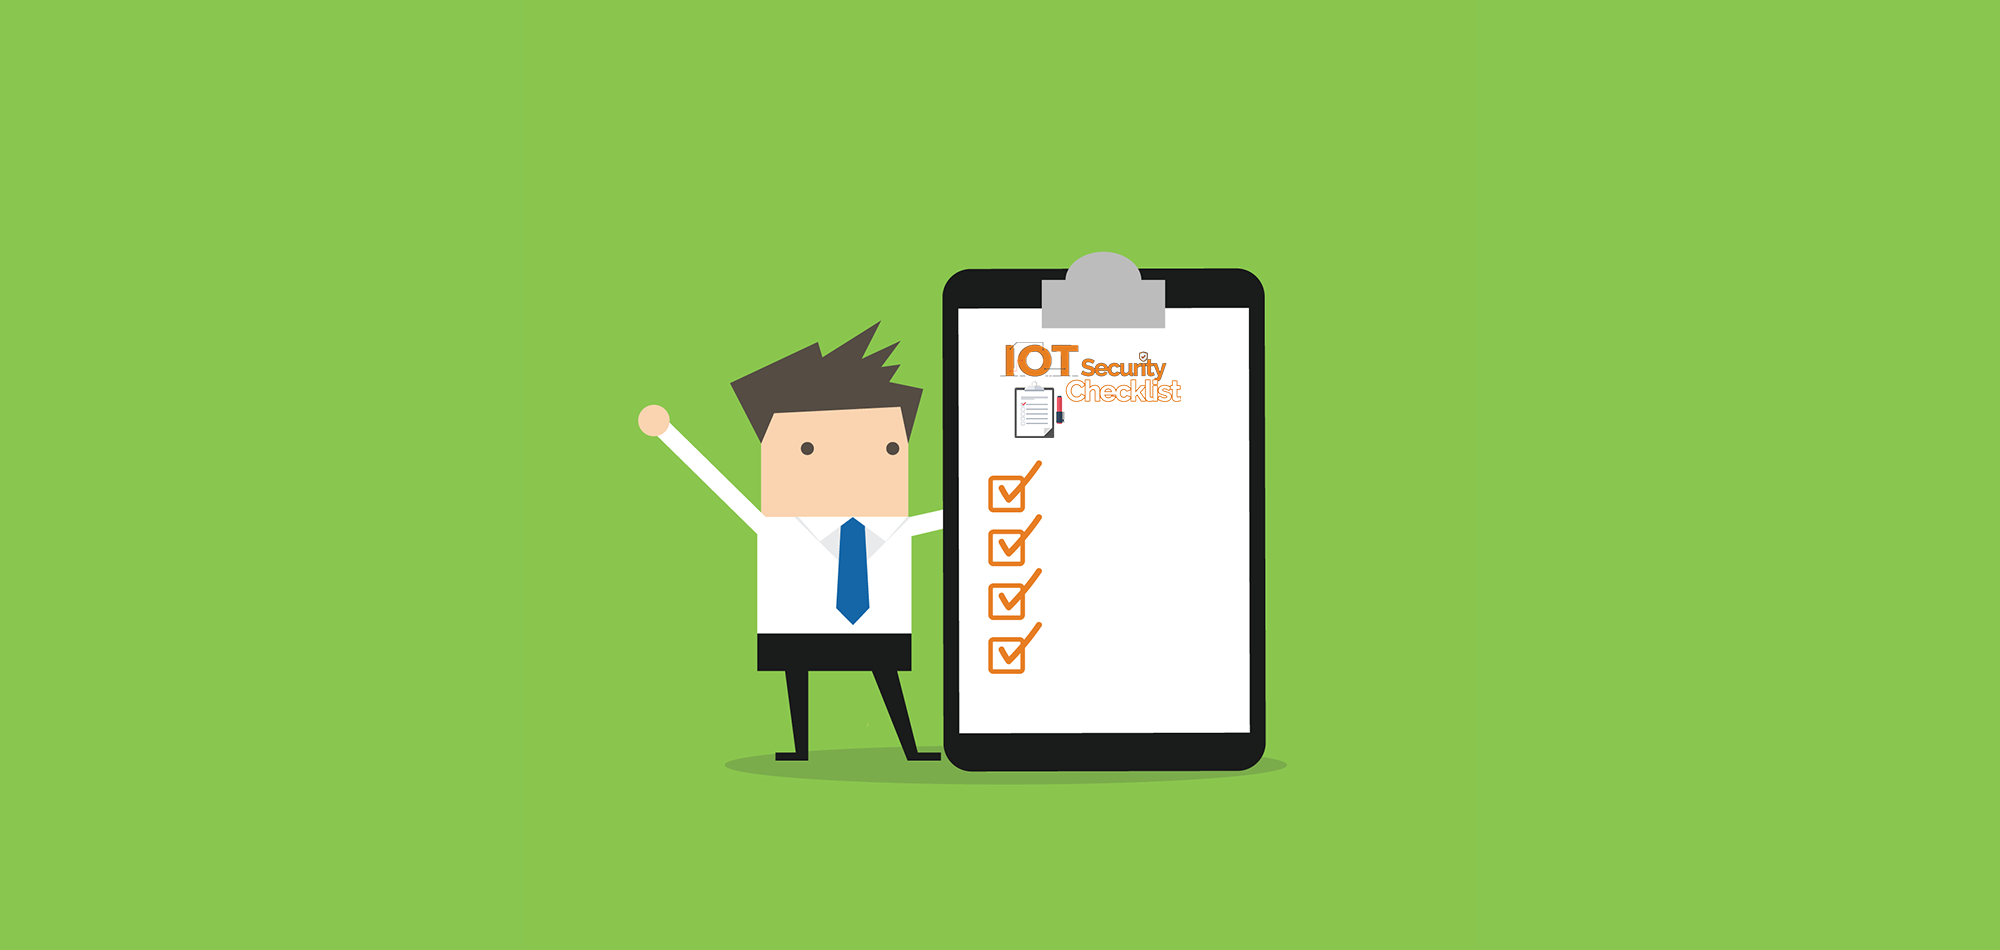 happy network engineer standing next to iot security checklist